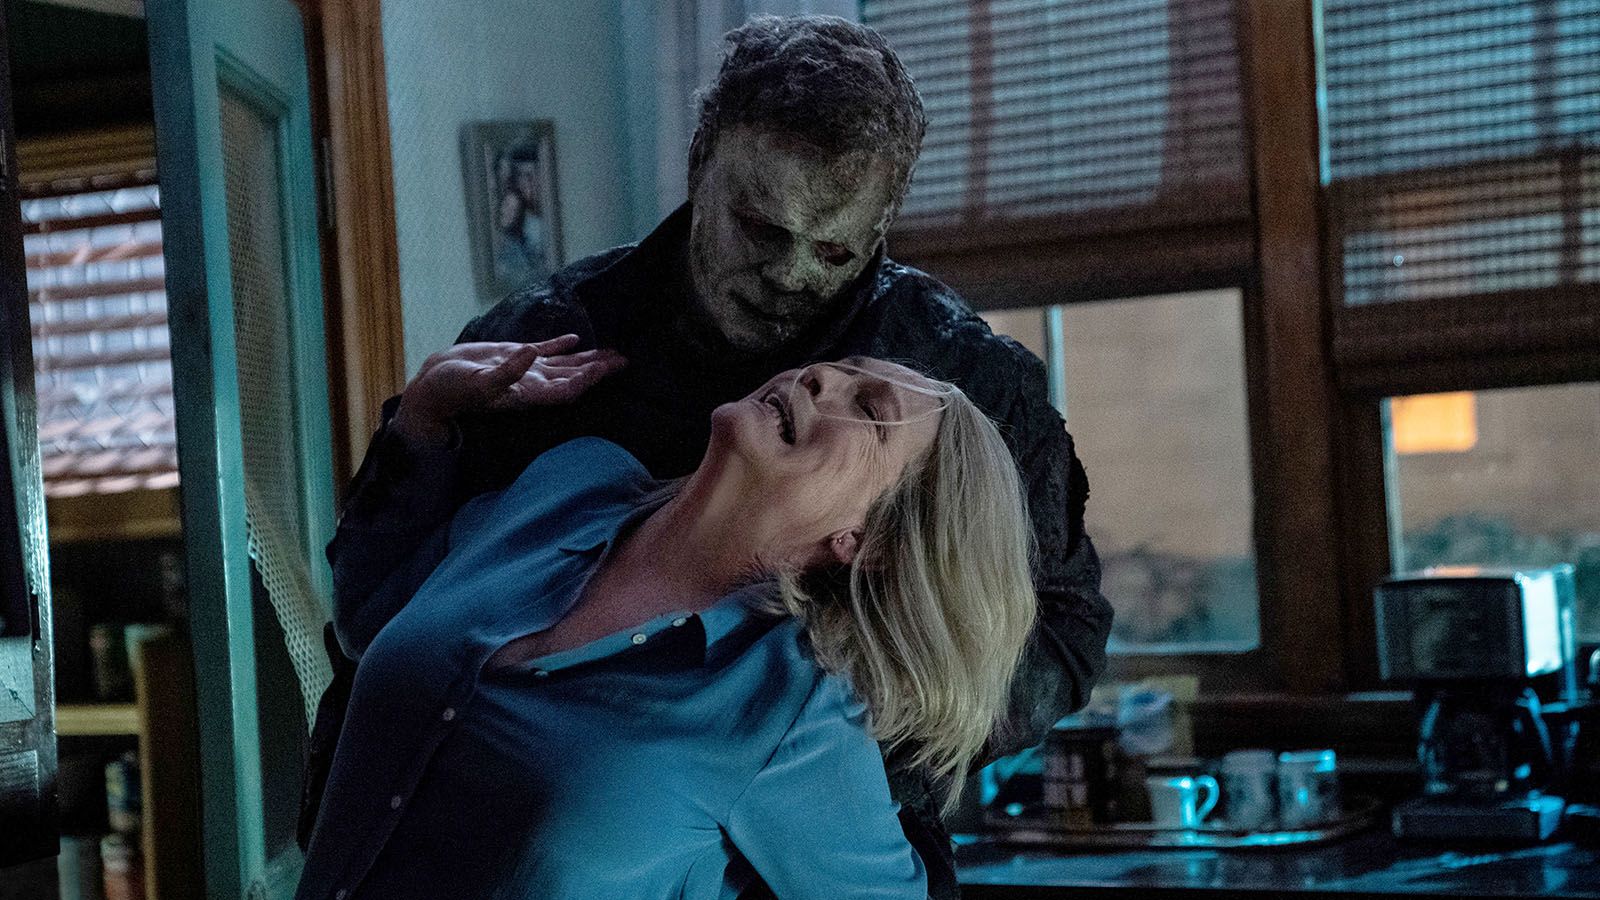 Michael Myers and Laurie Strode have their final battle in "Halloween Ends."